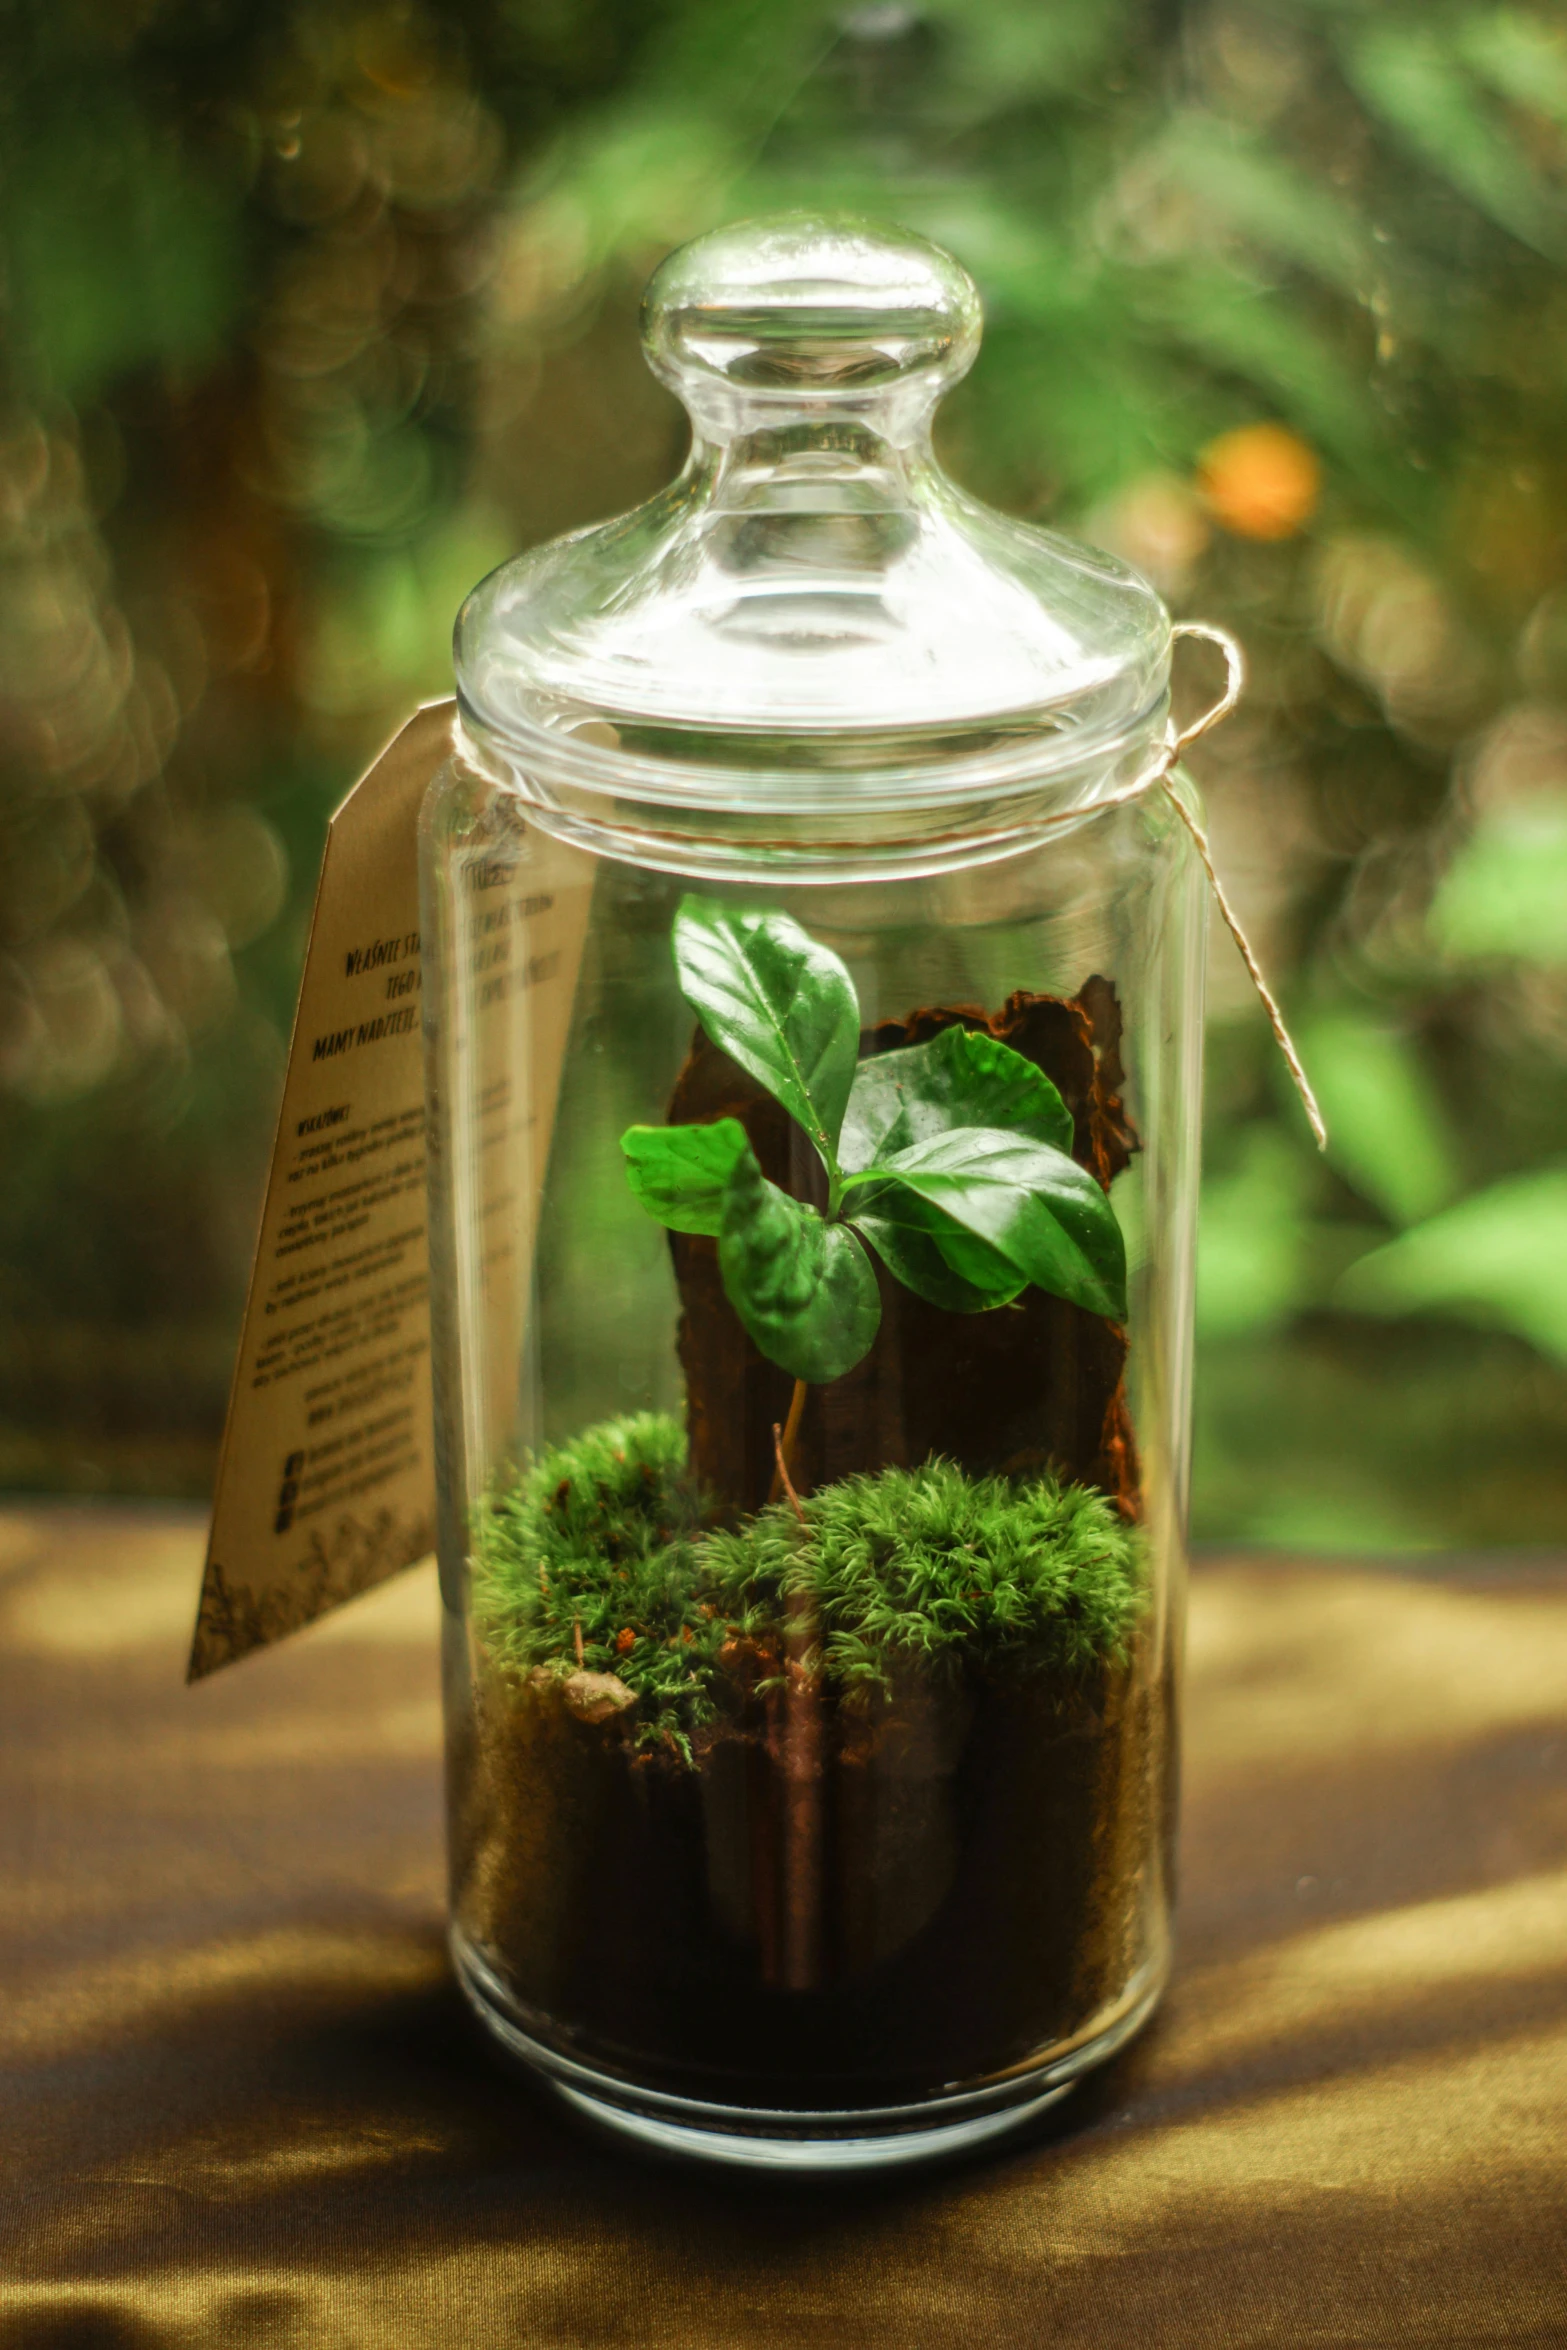 a glass jar with a plant inside of it, inspired by Hugo Sánchez Bonilla, environmental art, chocolate, placed in a lush forest, basil, with a long